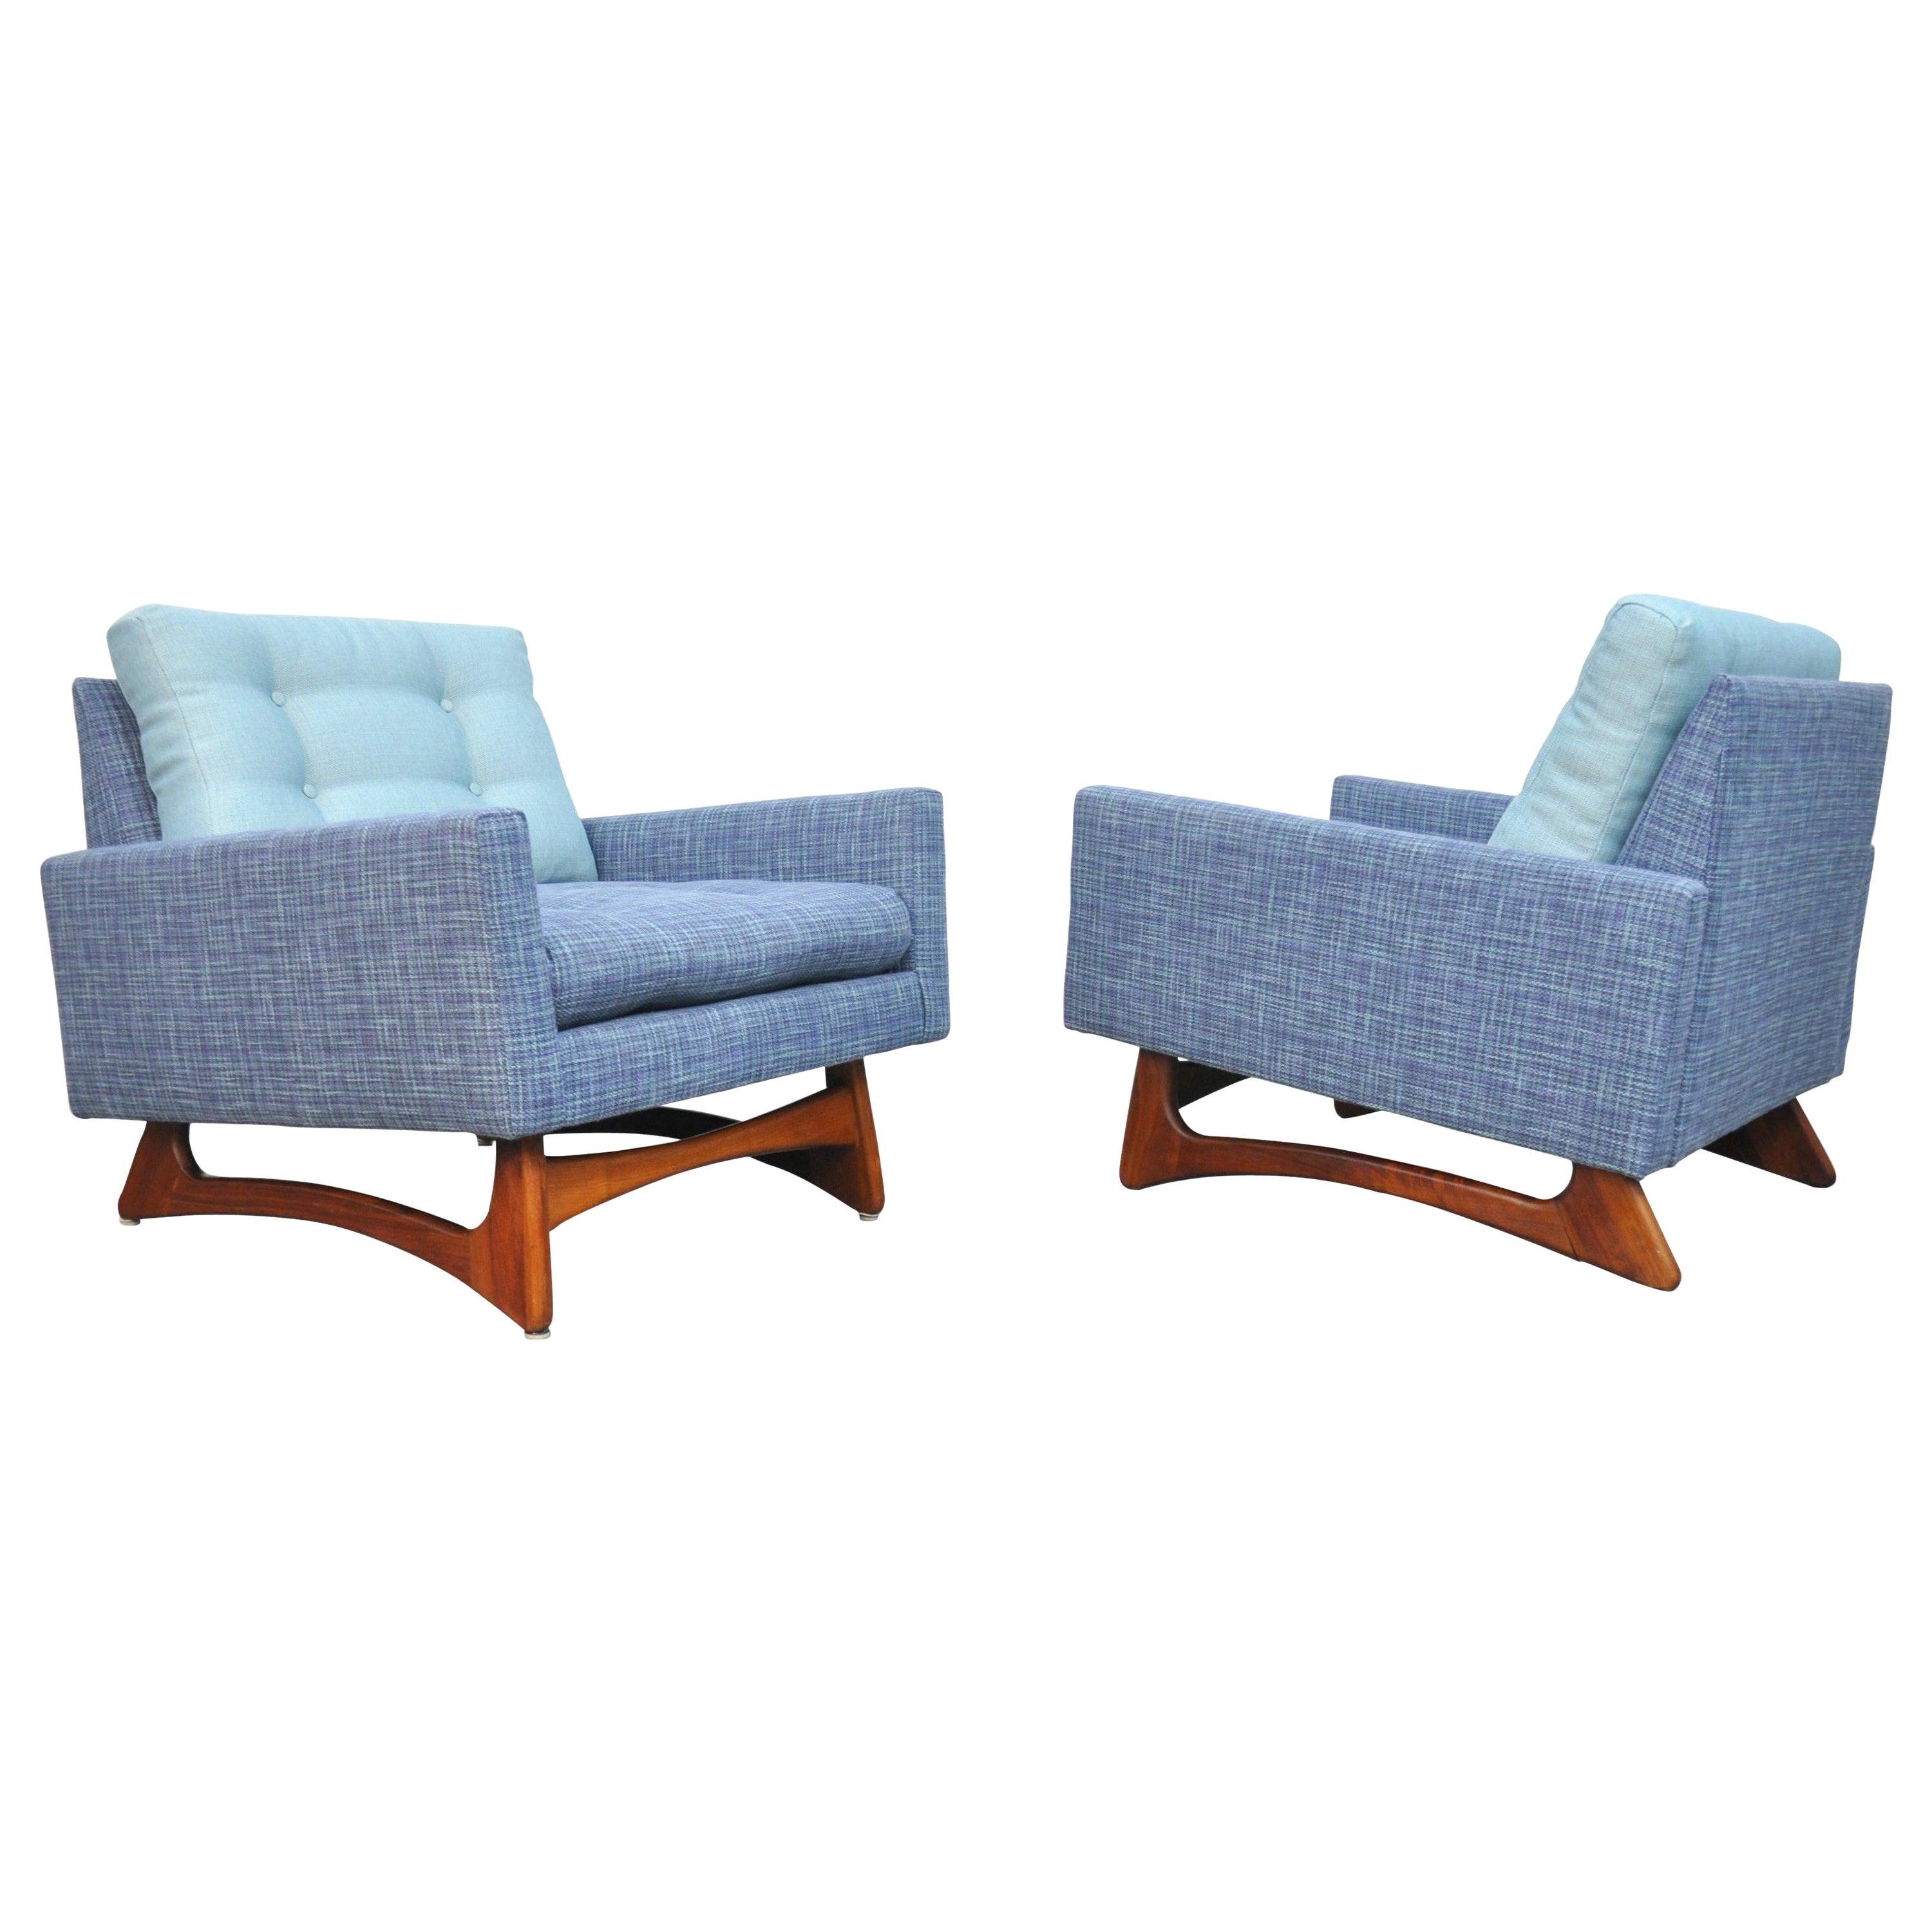 Pair Adrian Pearsall Blue Lounge Chairs, Craft Associates, Model 2406-C